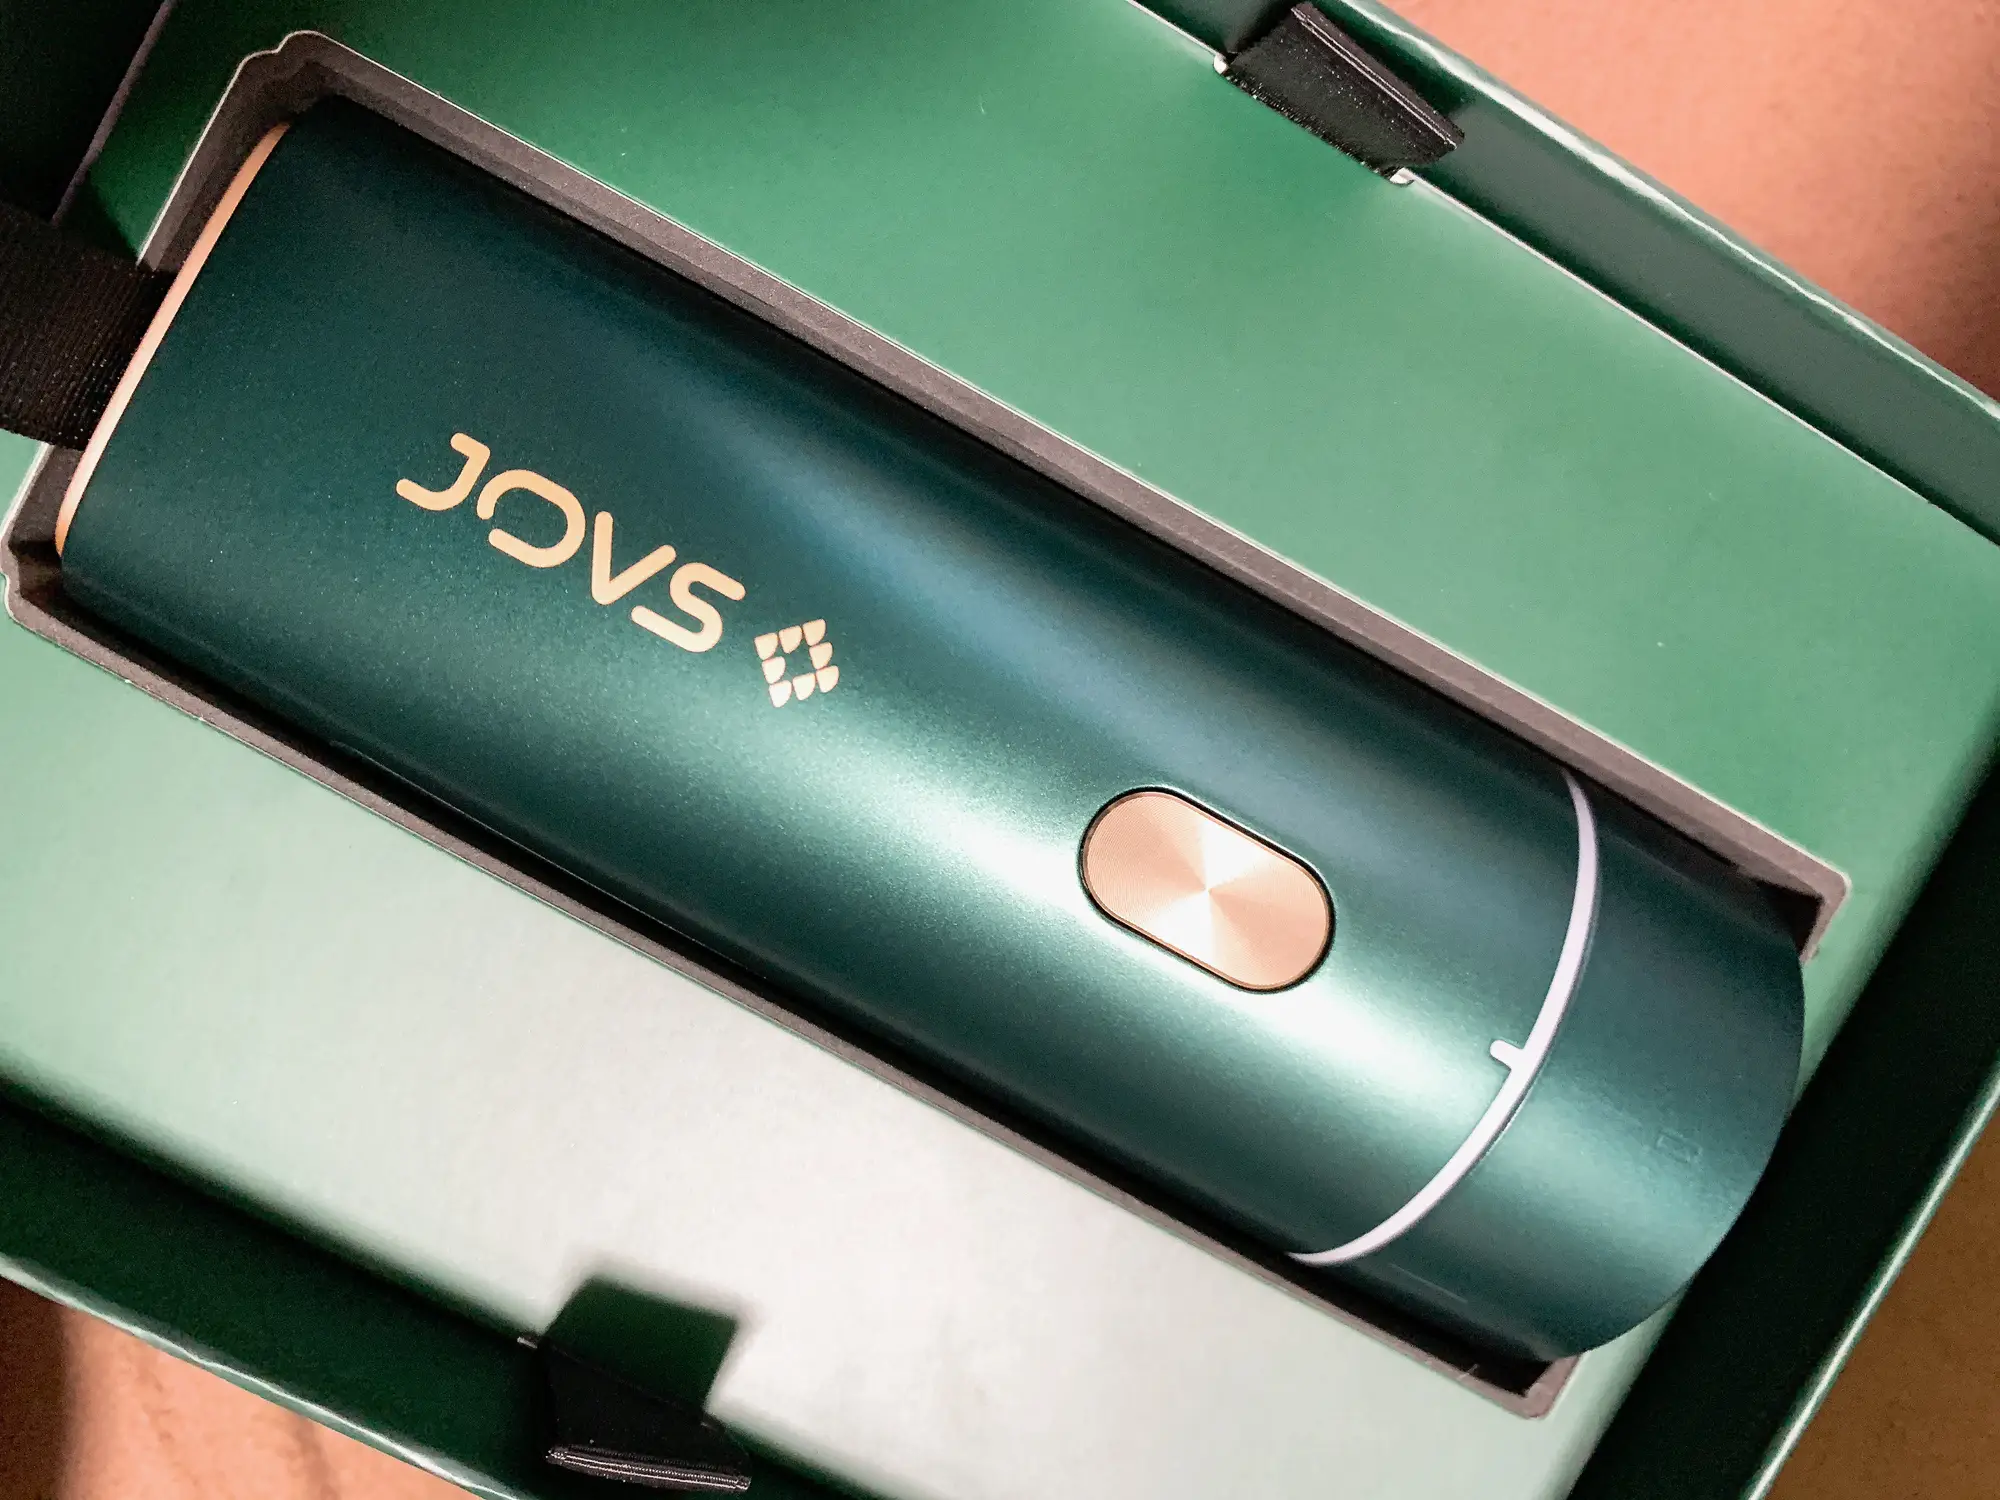 Birthday gift to yourself! Jovs home hair removal device | Gallery